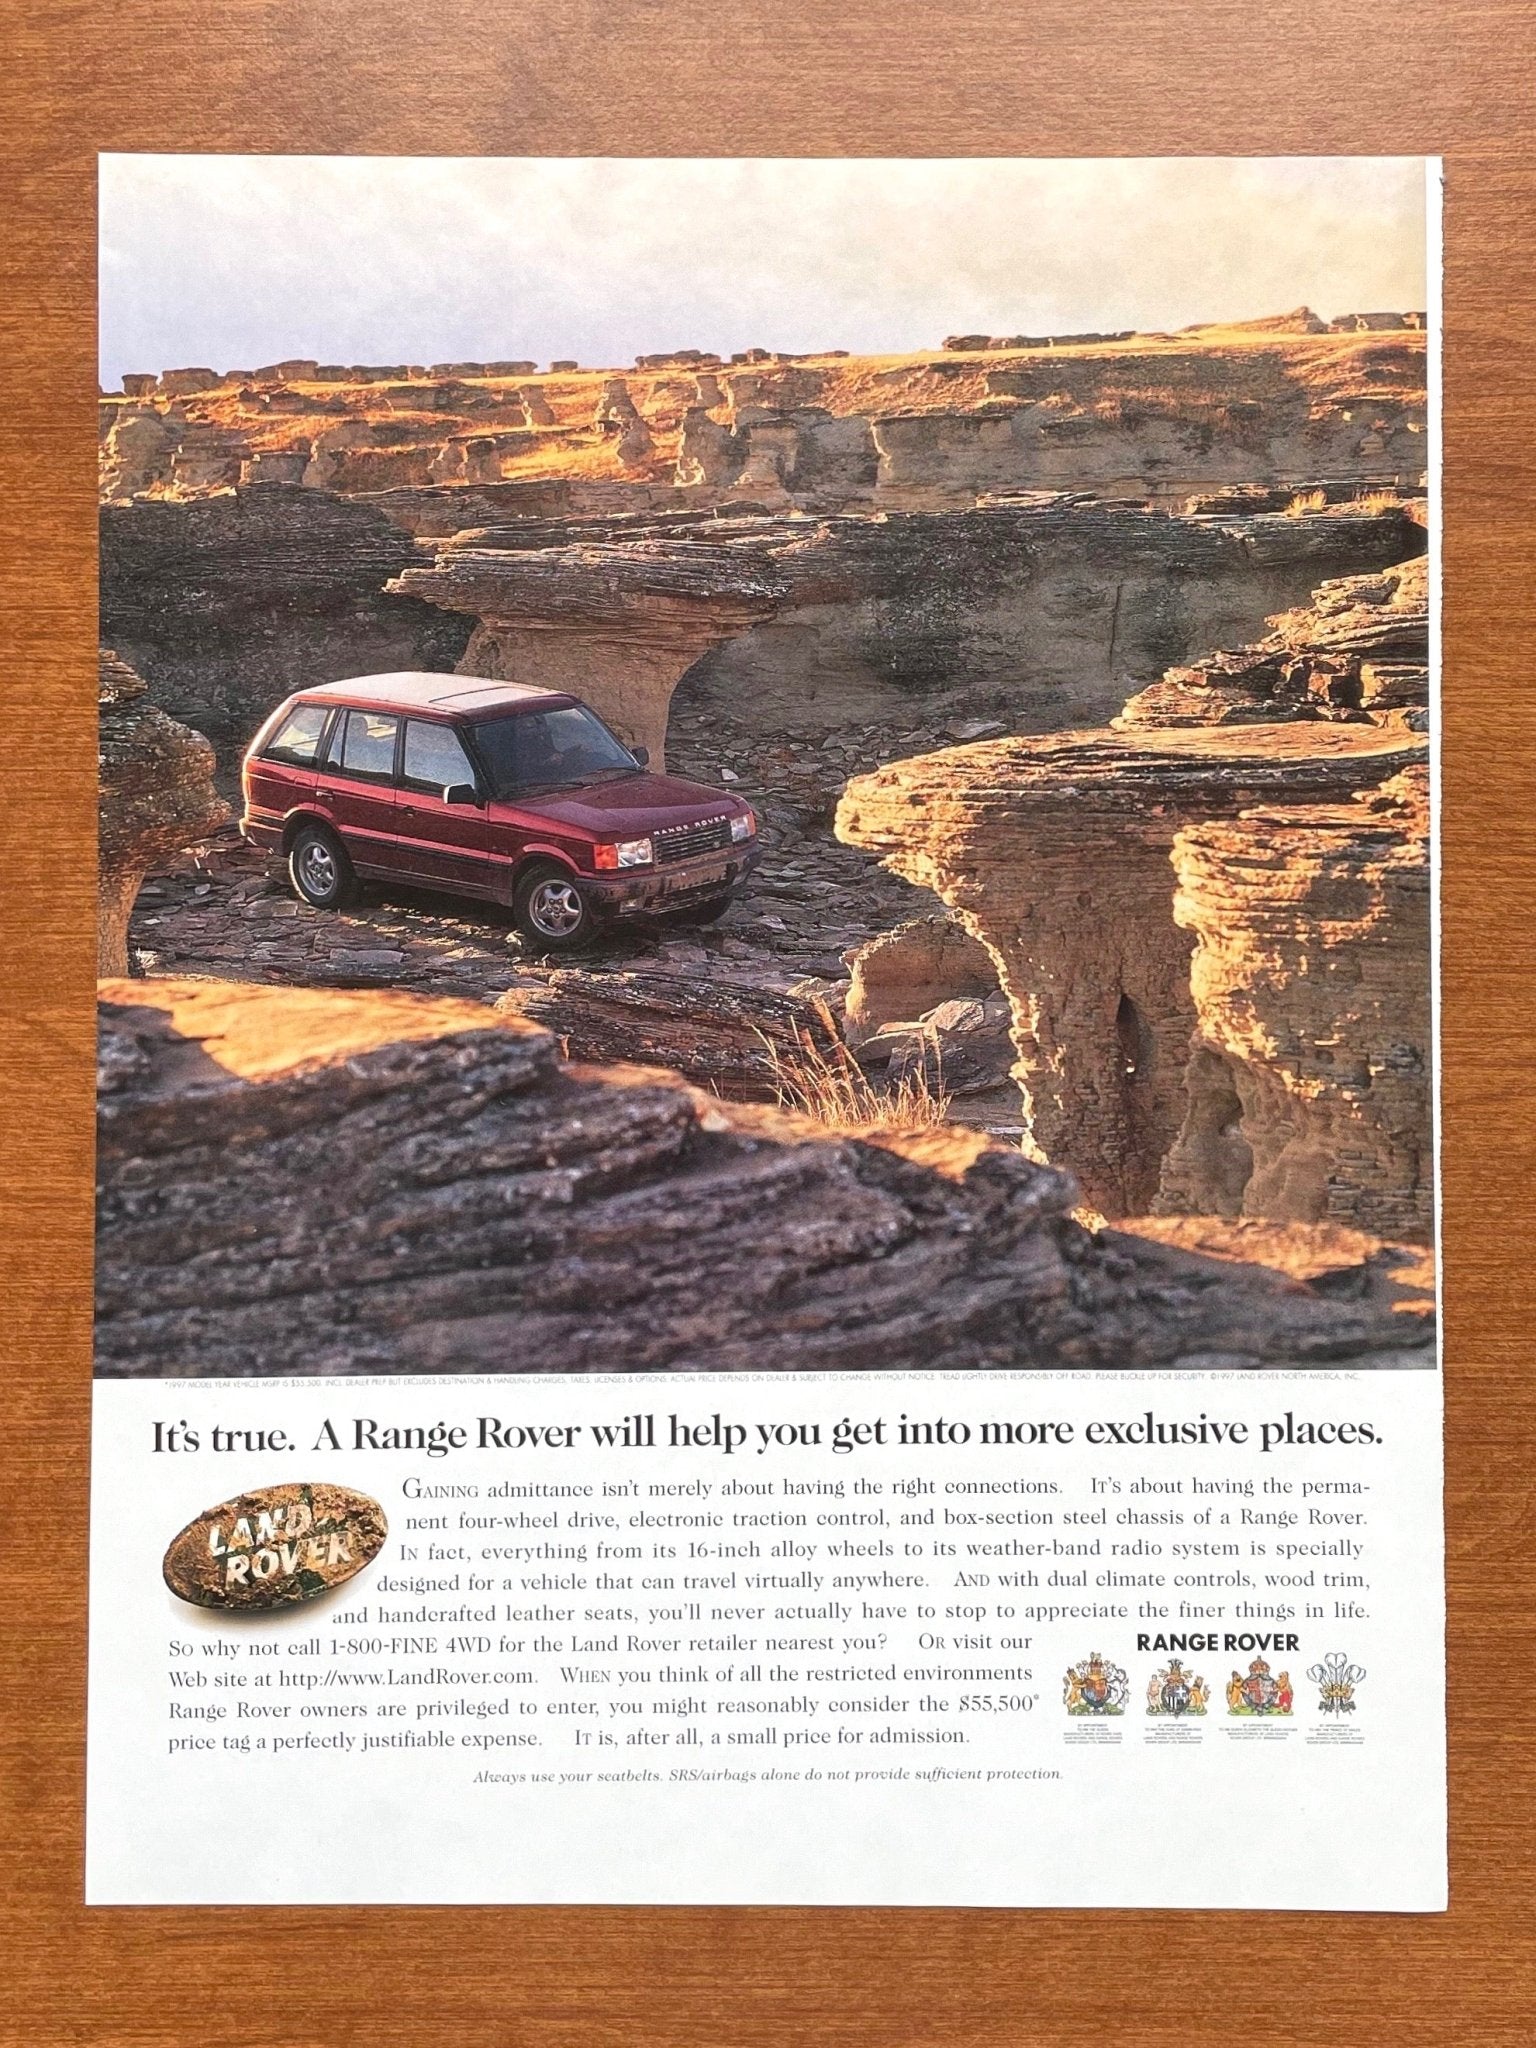 1997 Range Rover "get into the most exclusive places." Advertisement